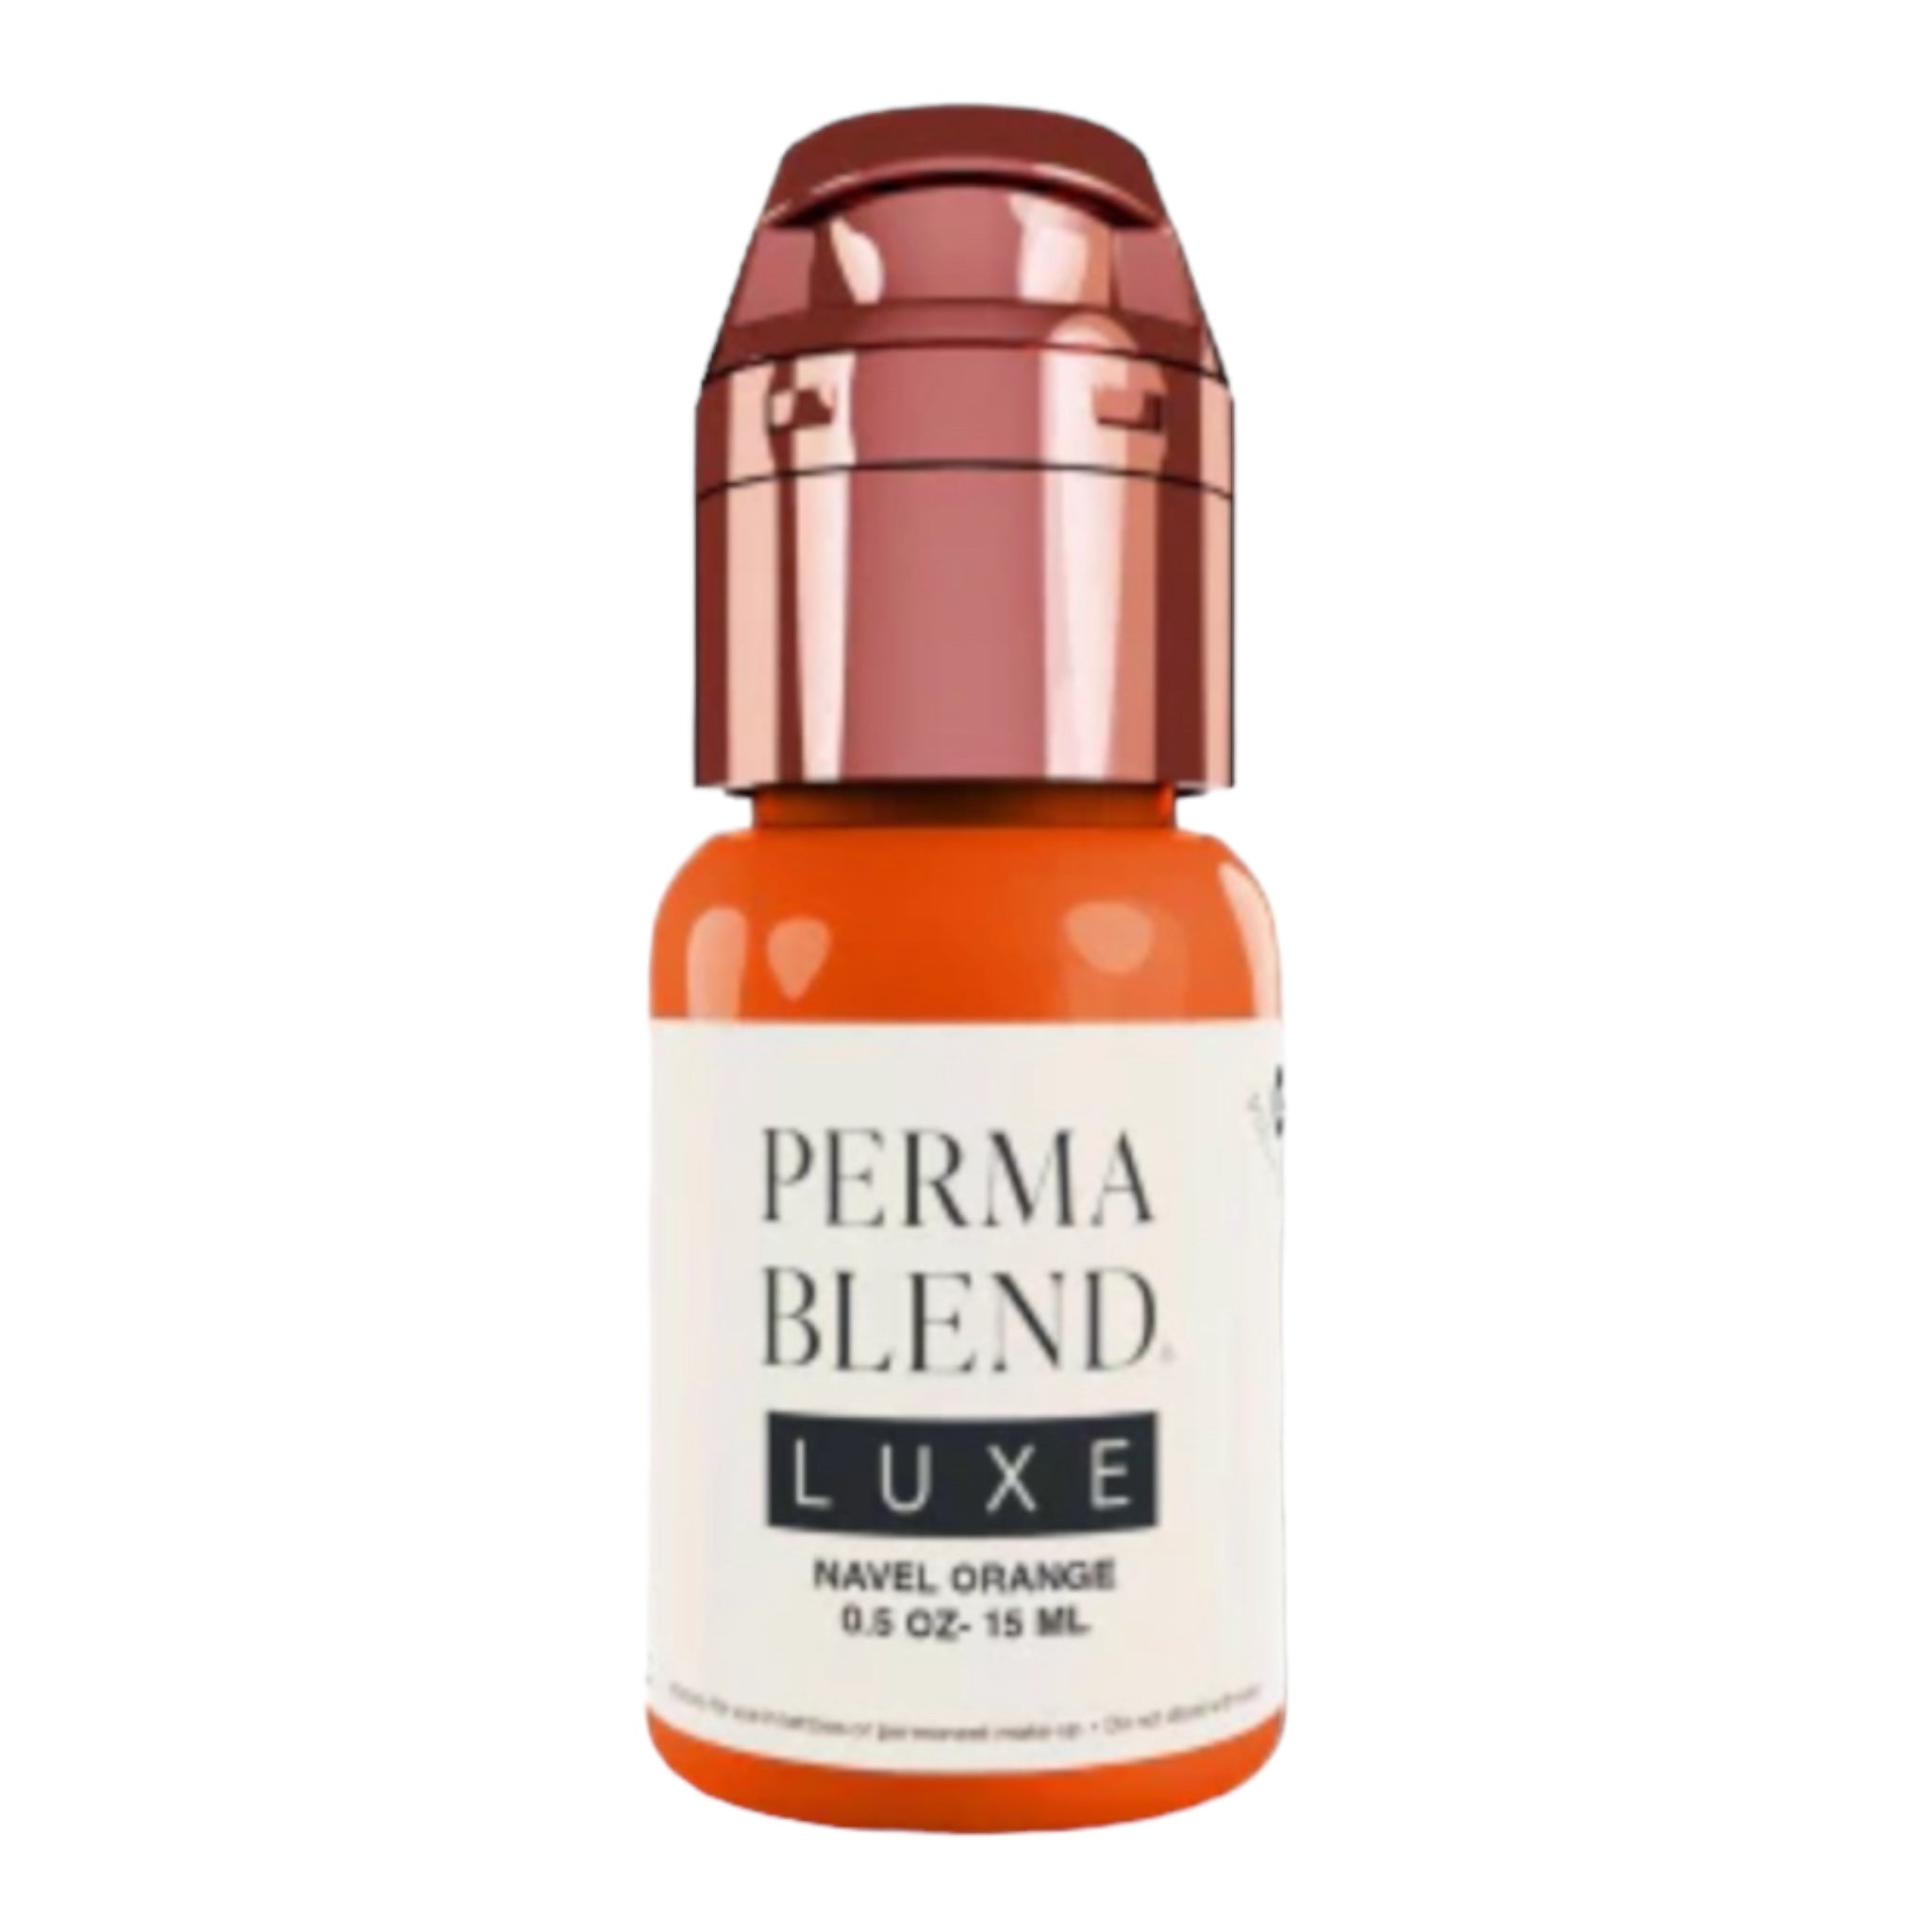 Encre Maquillage Perma Blend Luxe 15ml - Navel Orange